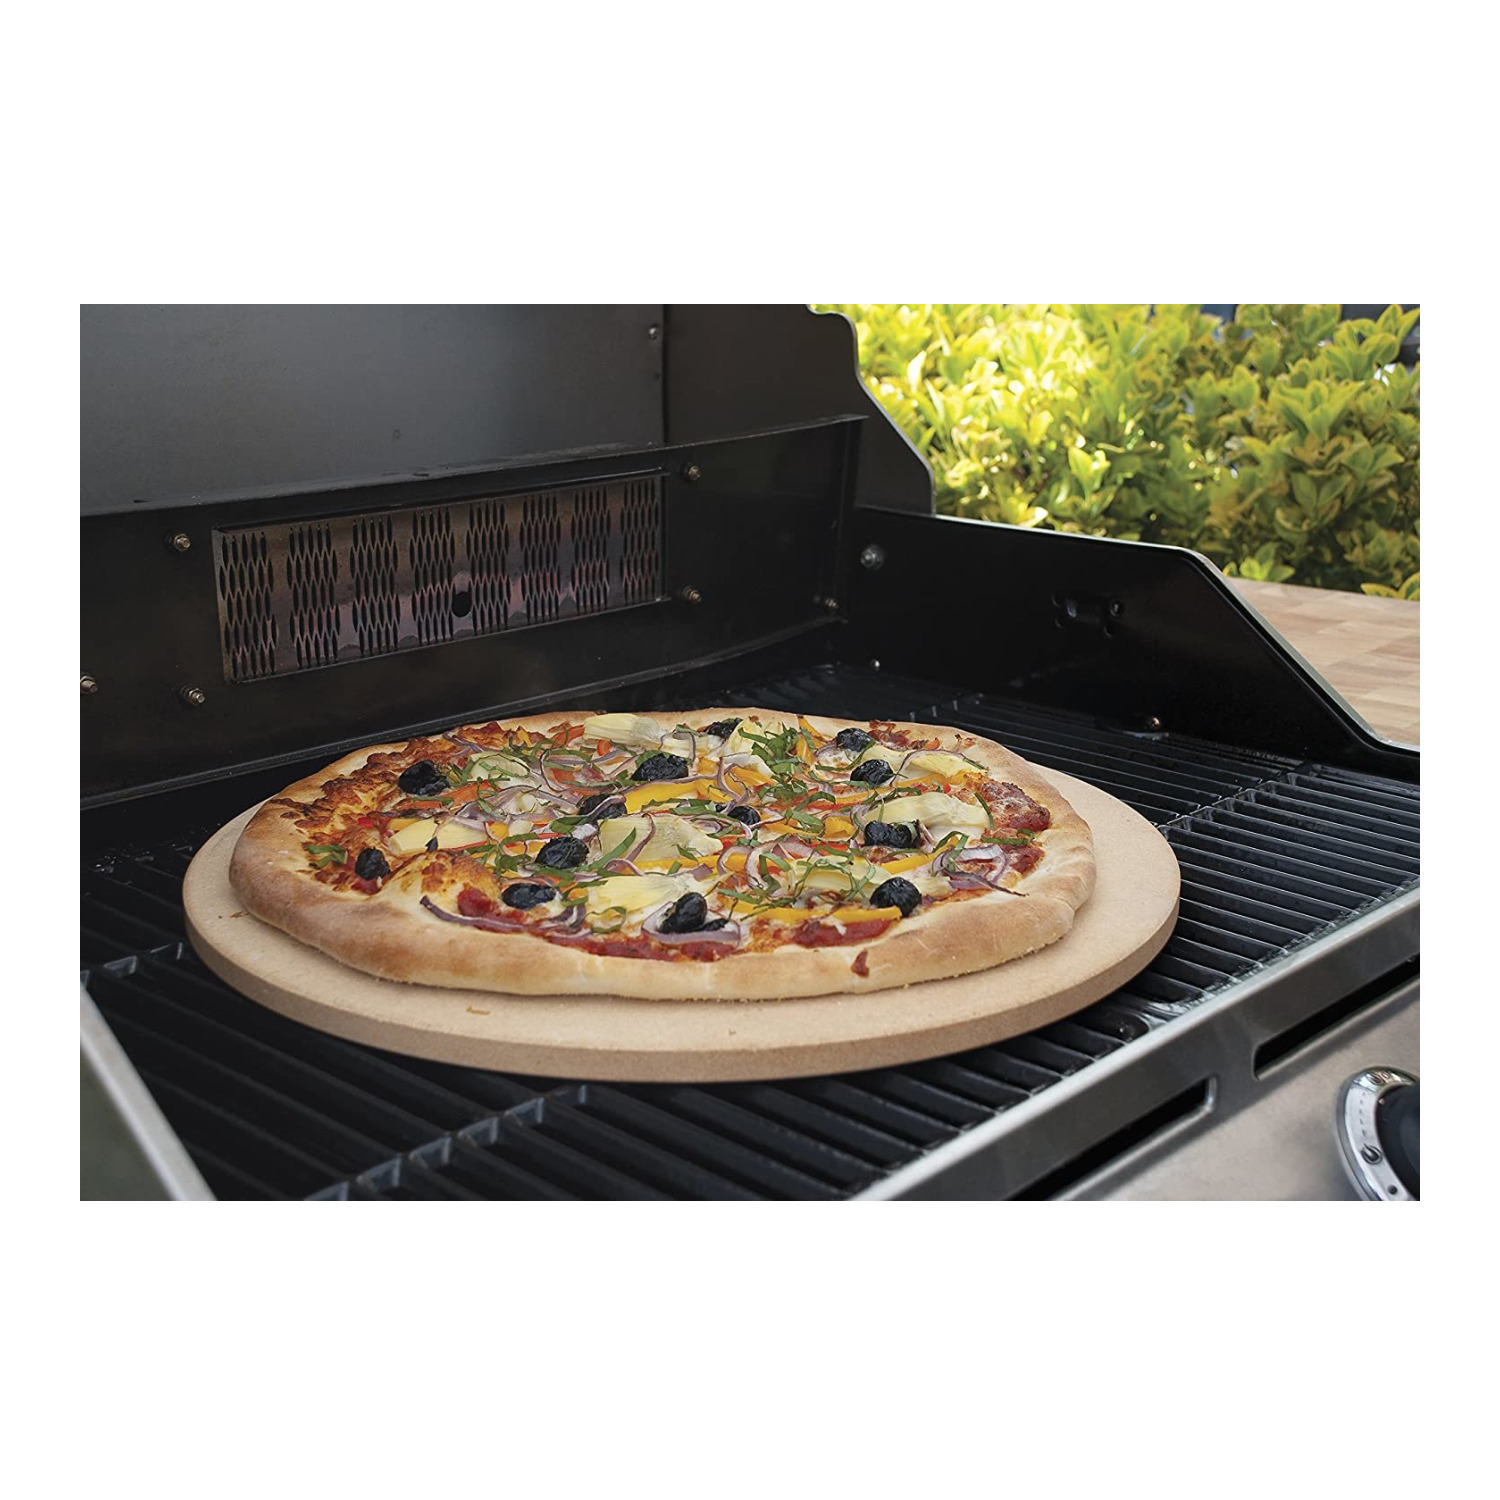 Pizzacraft 16.5-Inch Round Thermabond Baking/Pizza Stone with Folding Peel and Stone Brush - image 4 of 5